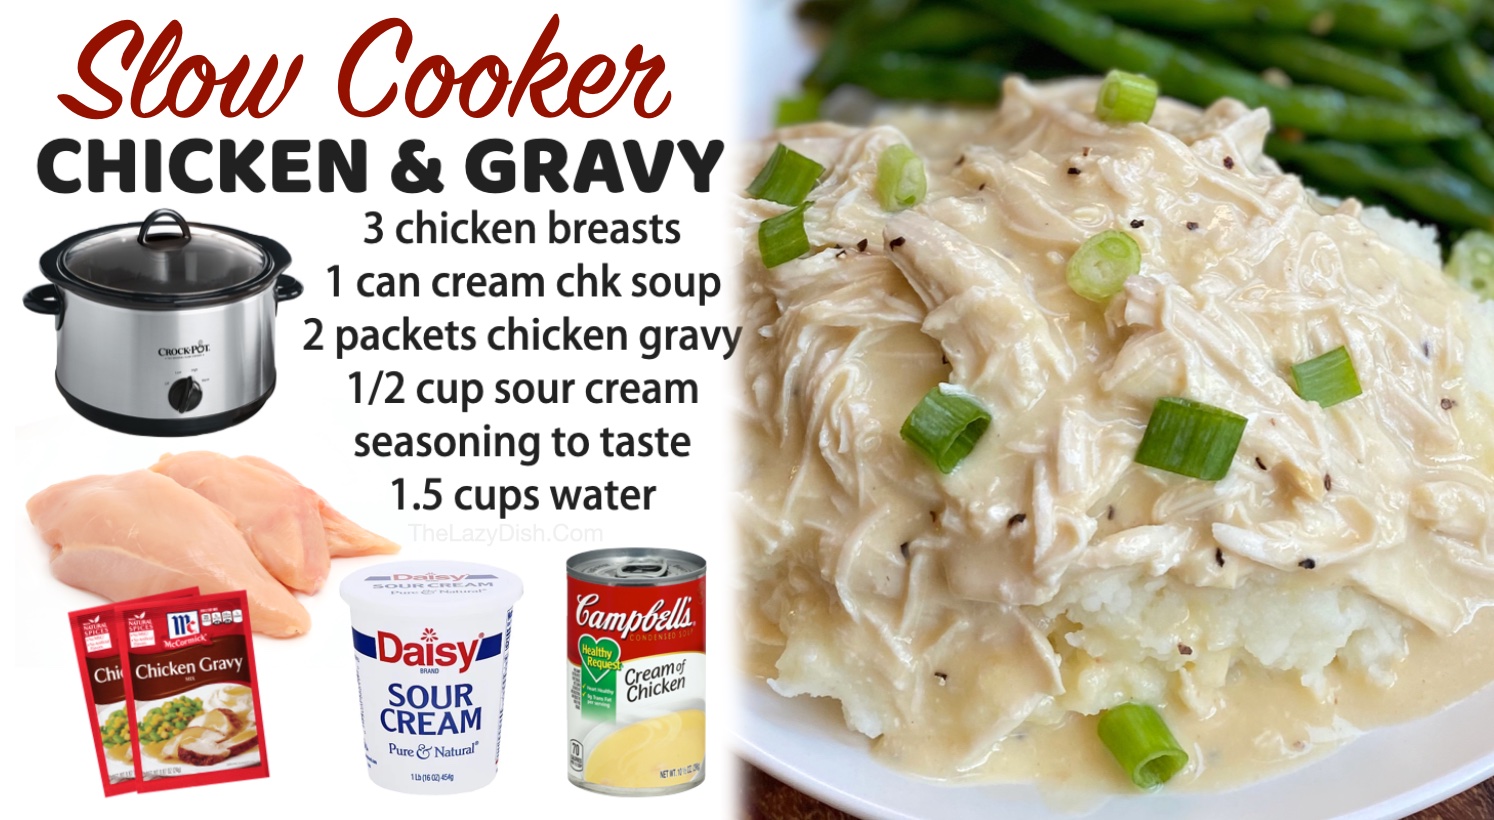 https://www.thelazydish.com/wp-content/uploads/2020/09/slow-cooker-chicken-gravy-easy-dinner-idea-for-a-family-with-kids.jpg